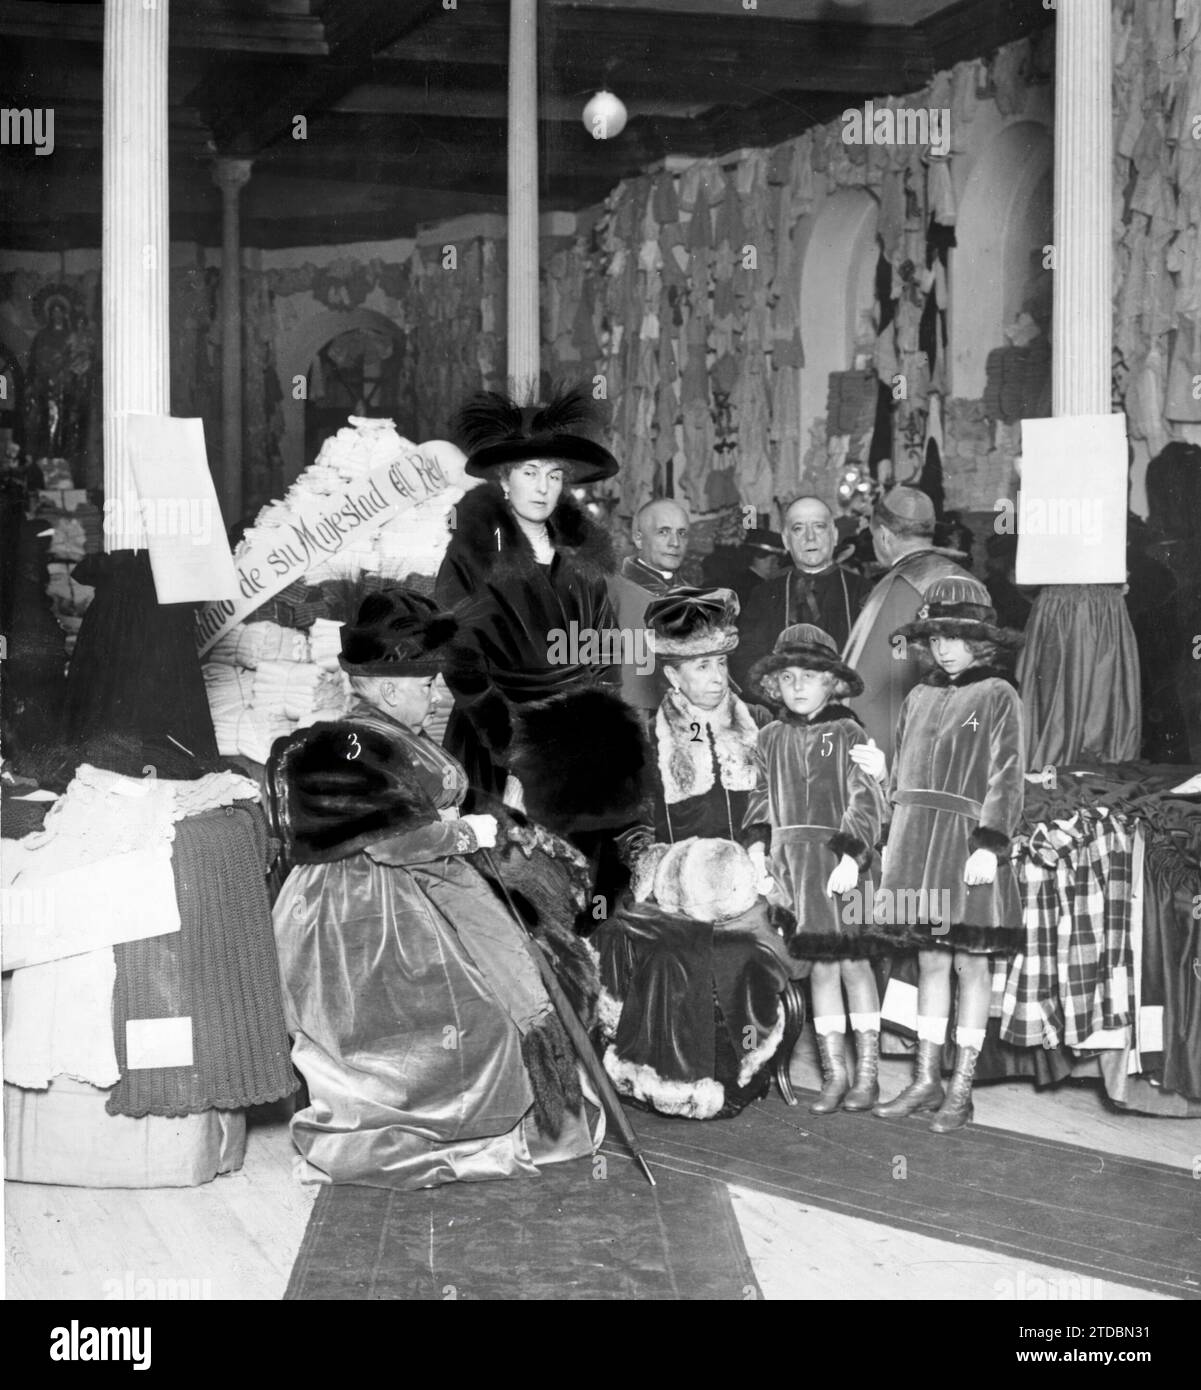 11/30/1917. At the Sacred Heart School. Ss.Mm. Queens Doña Victoria (1) and Doña María Cristina (2), with Ss.Aa.Rr. The Infantas Doña Isabel (3), Doña Beatriz (4) and Doña Cristina (5), Opening the exhibition of the Queen Victoria wardrobe, yesterday afternoon. Credit: Album / Archivo ABC / Ramón Alba Stock Photo